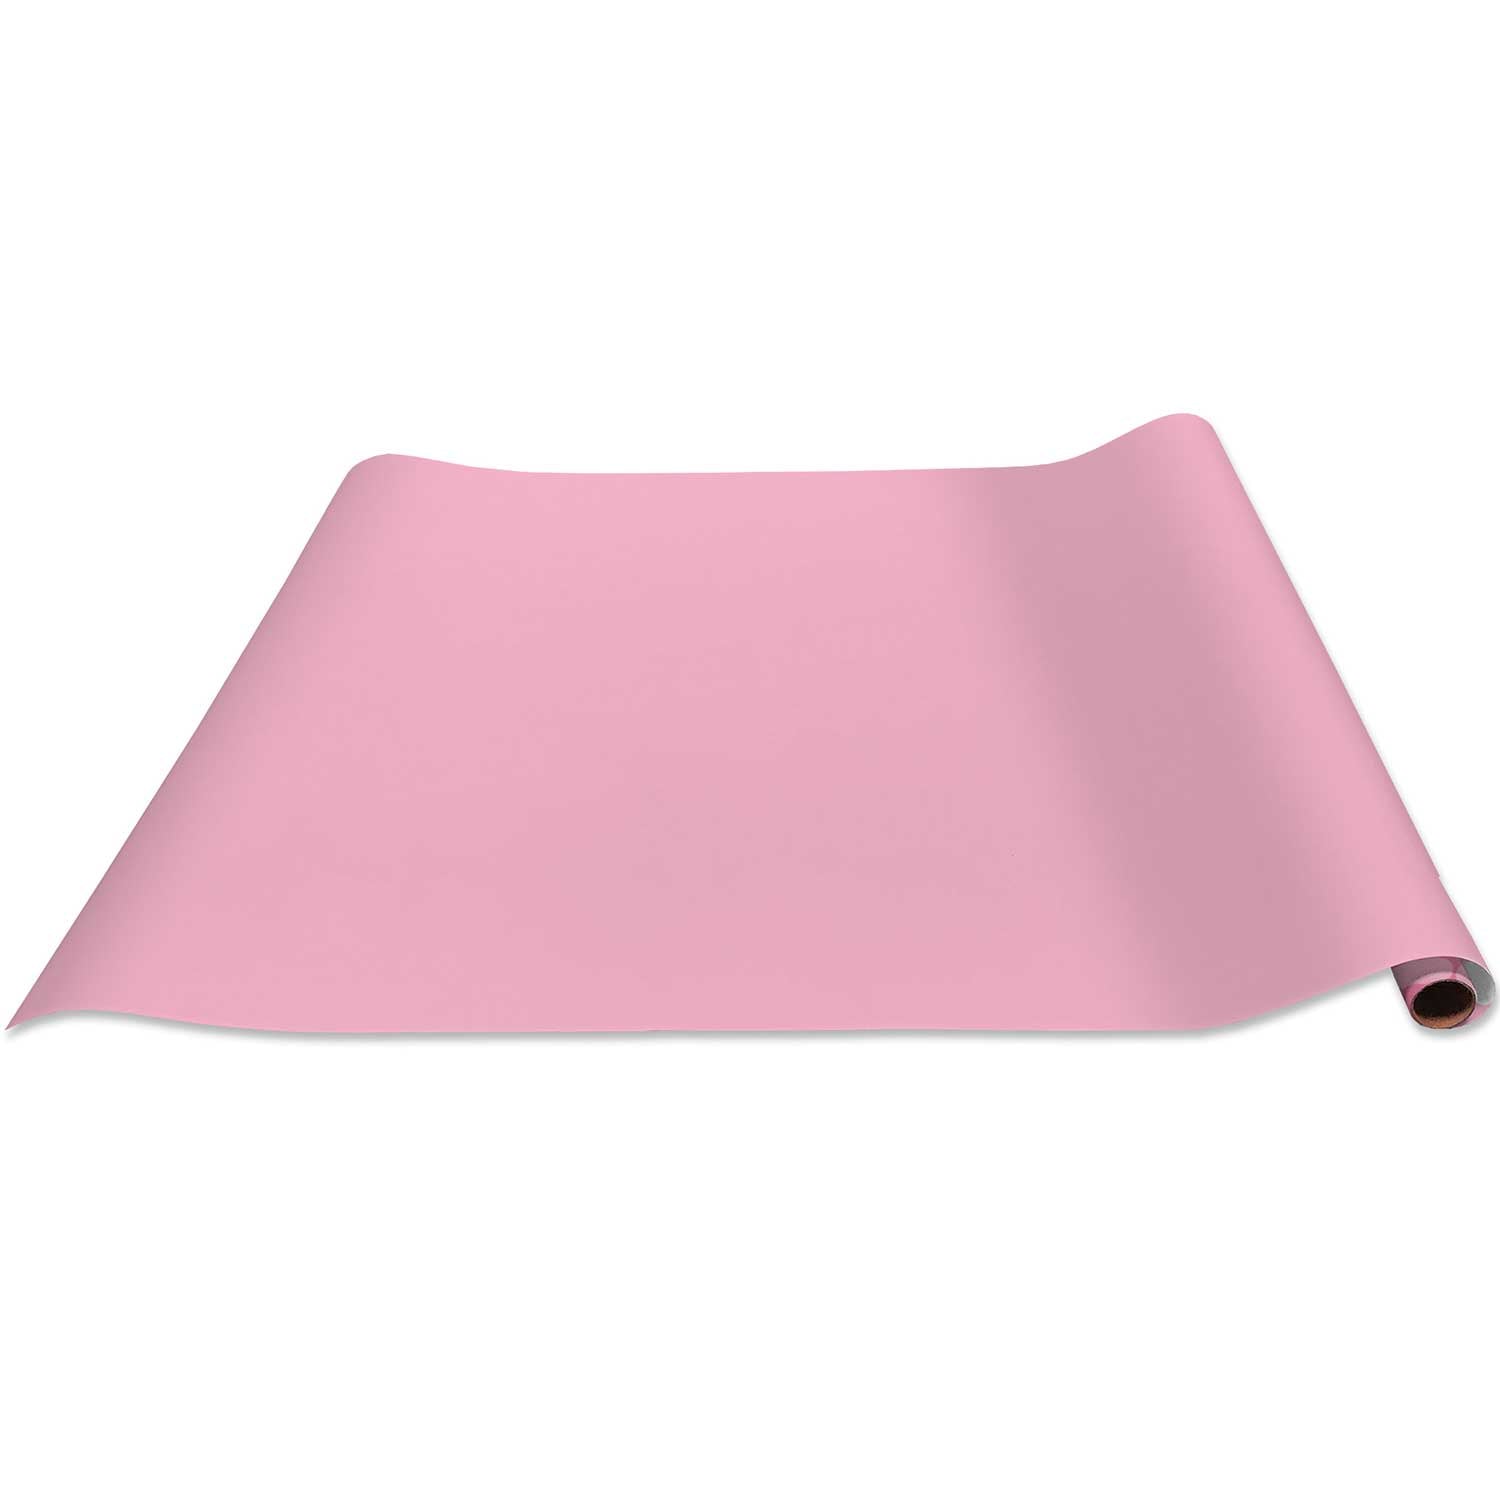 Matte Pastel Pink Gift Wrap Rolls 5 ft x 30 in (8 Pieces)